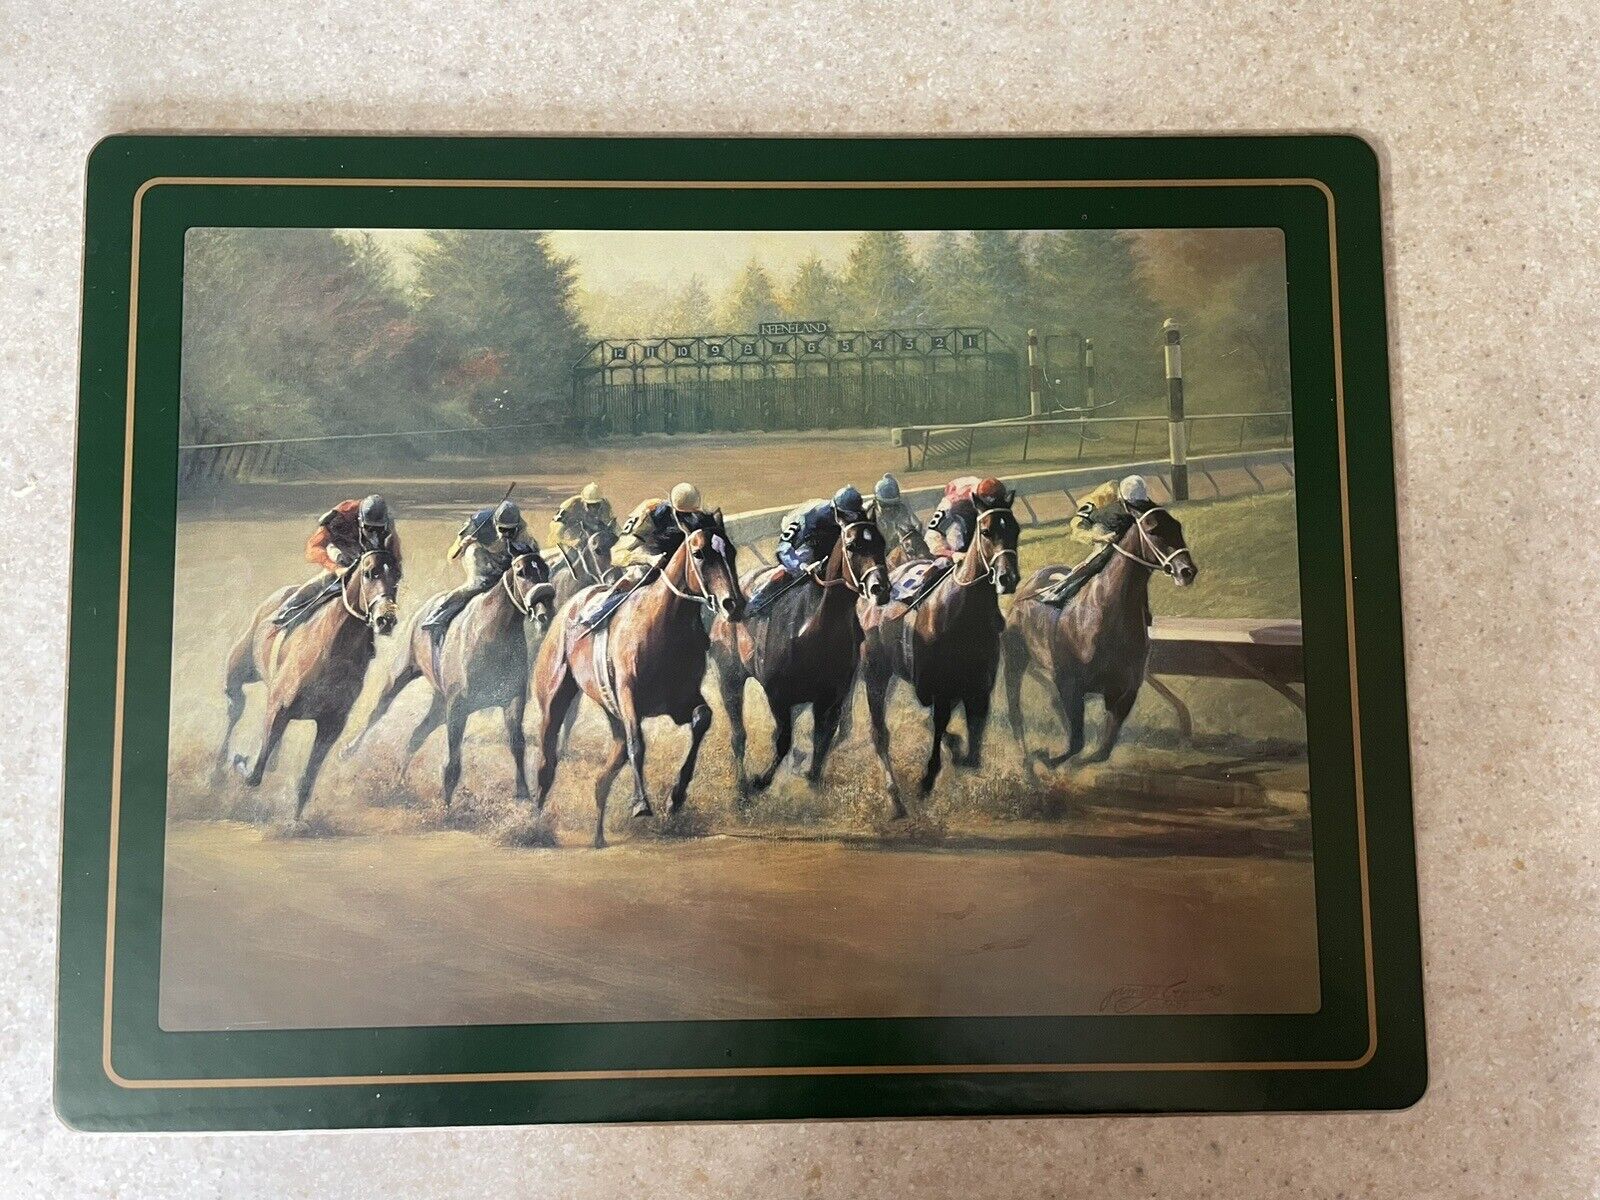 James L Crow Thundering Home Horse Racing Circa 1993 Wooden Print Placemat Photo